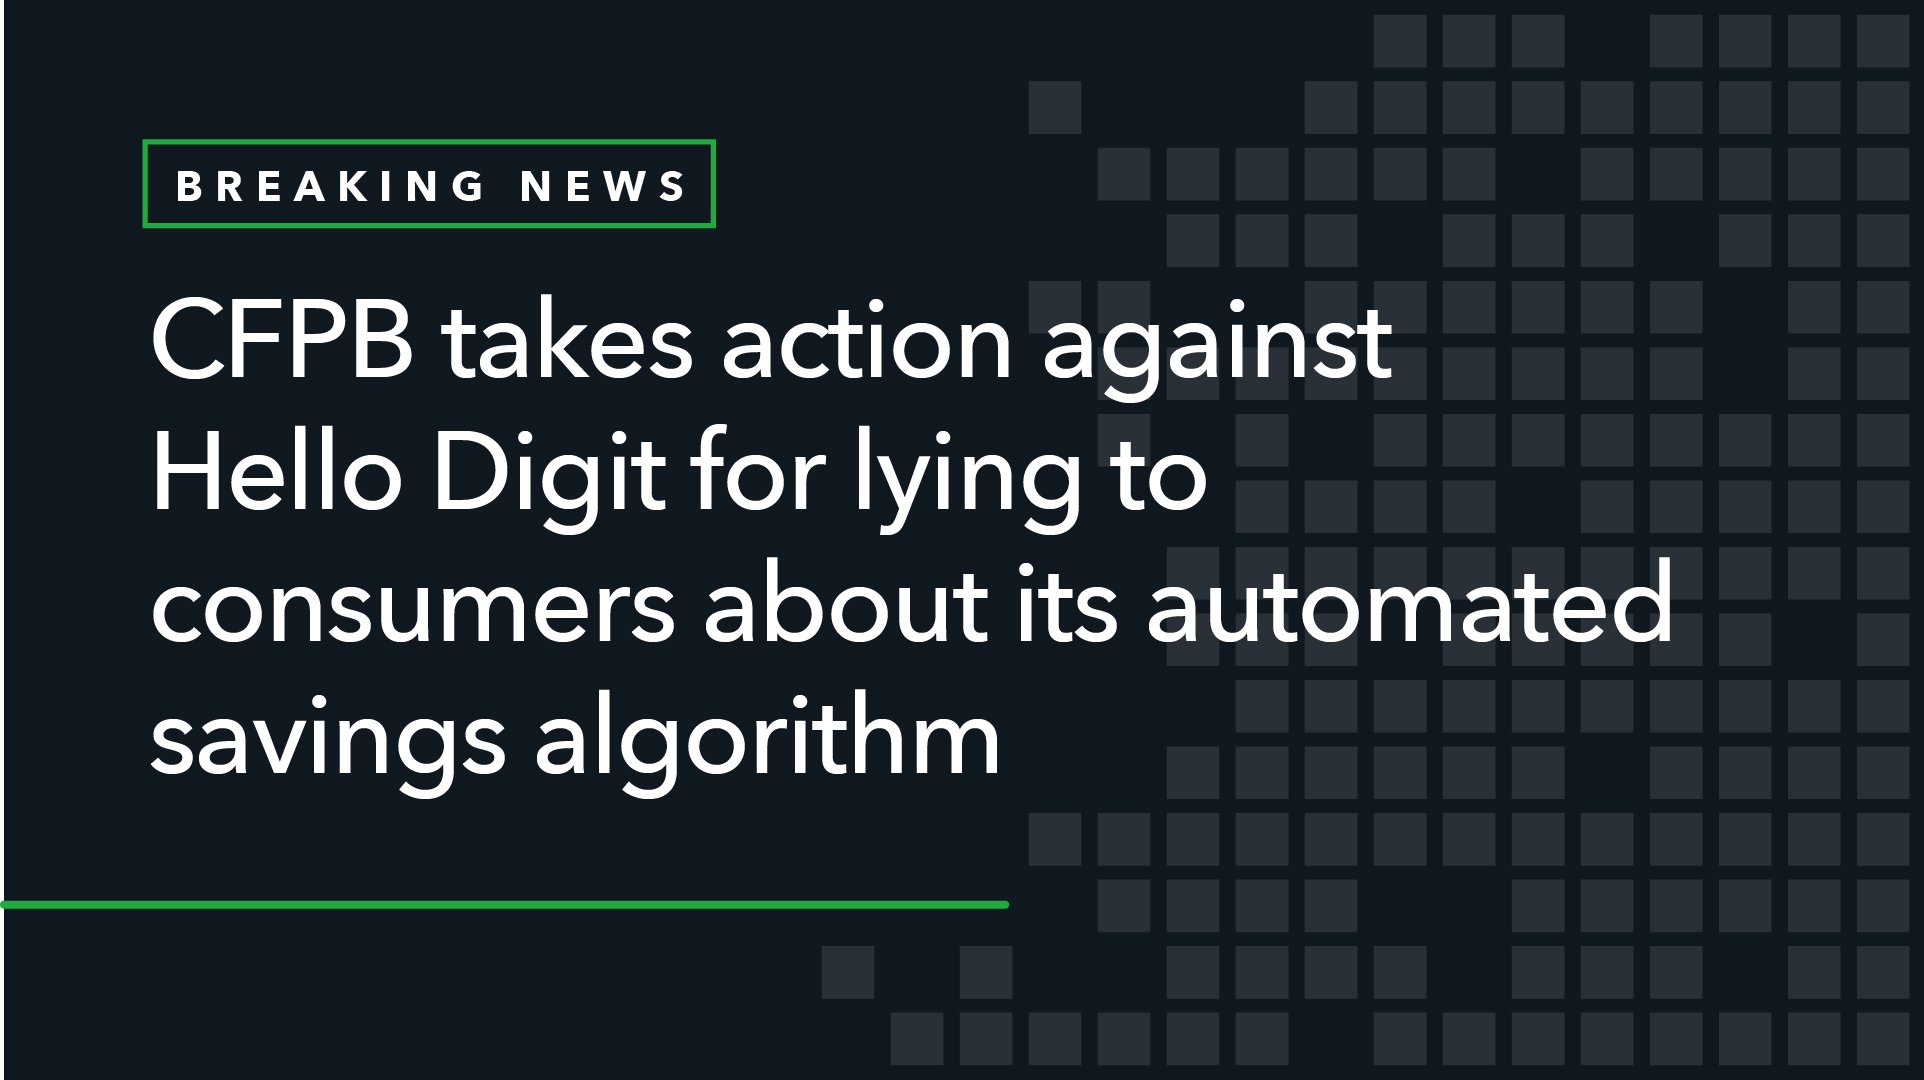 CFPB Takes Action Against Hello Digit for Lying to Consumers About Its Automated Savings Algorithm